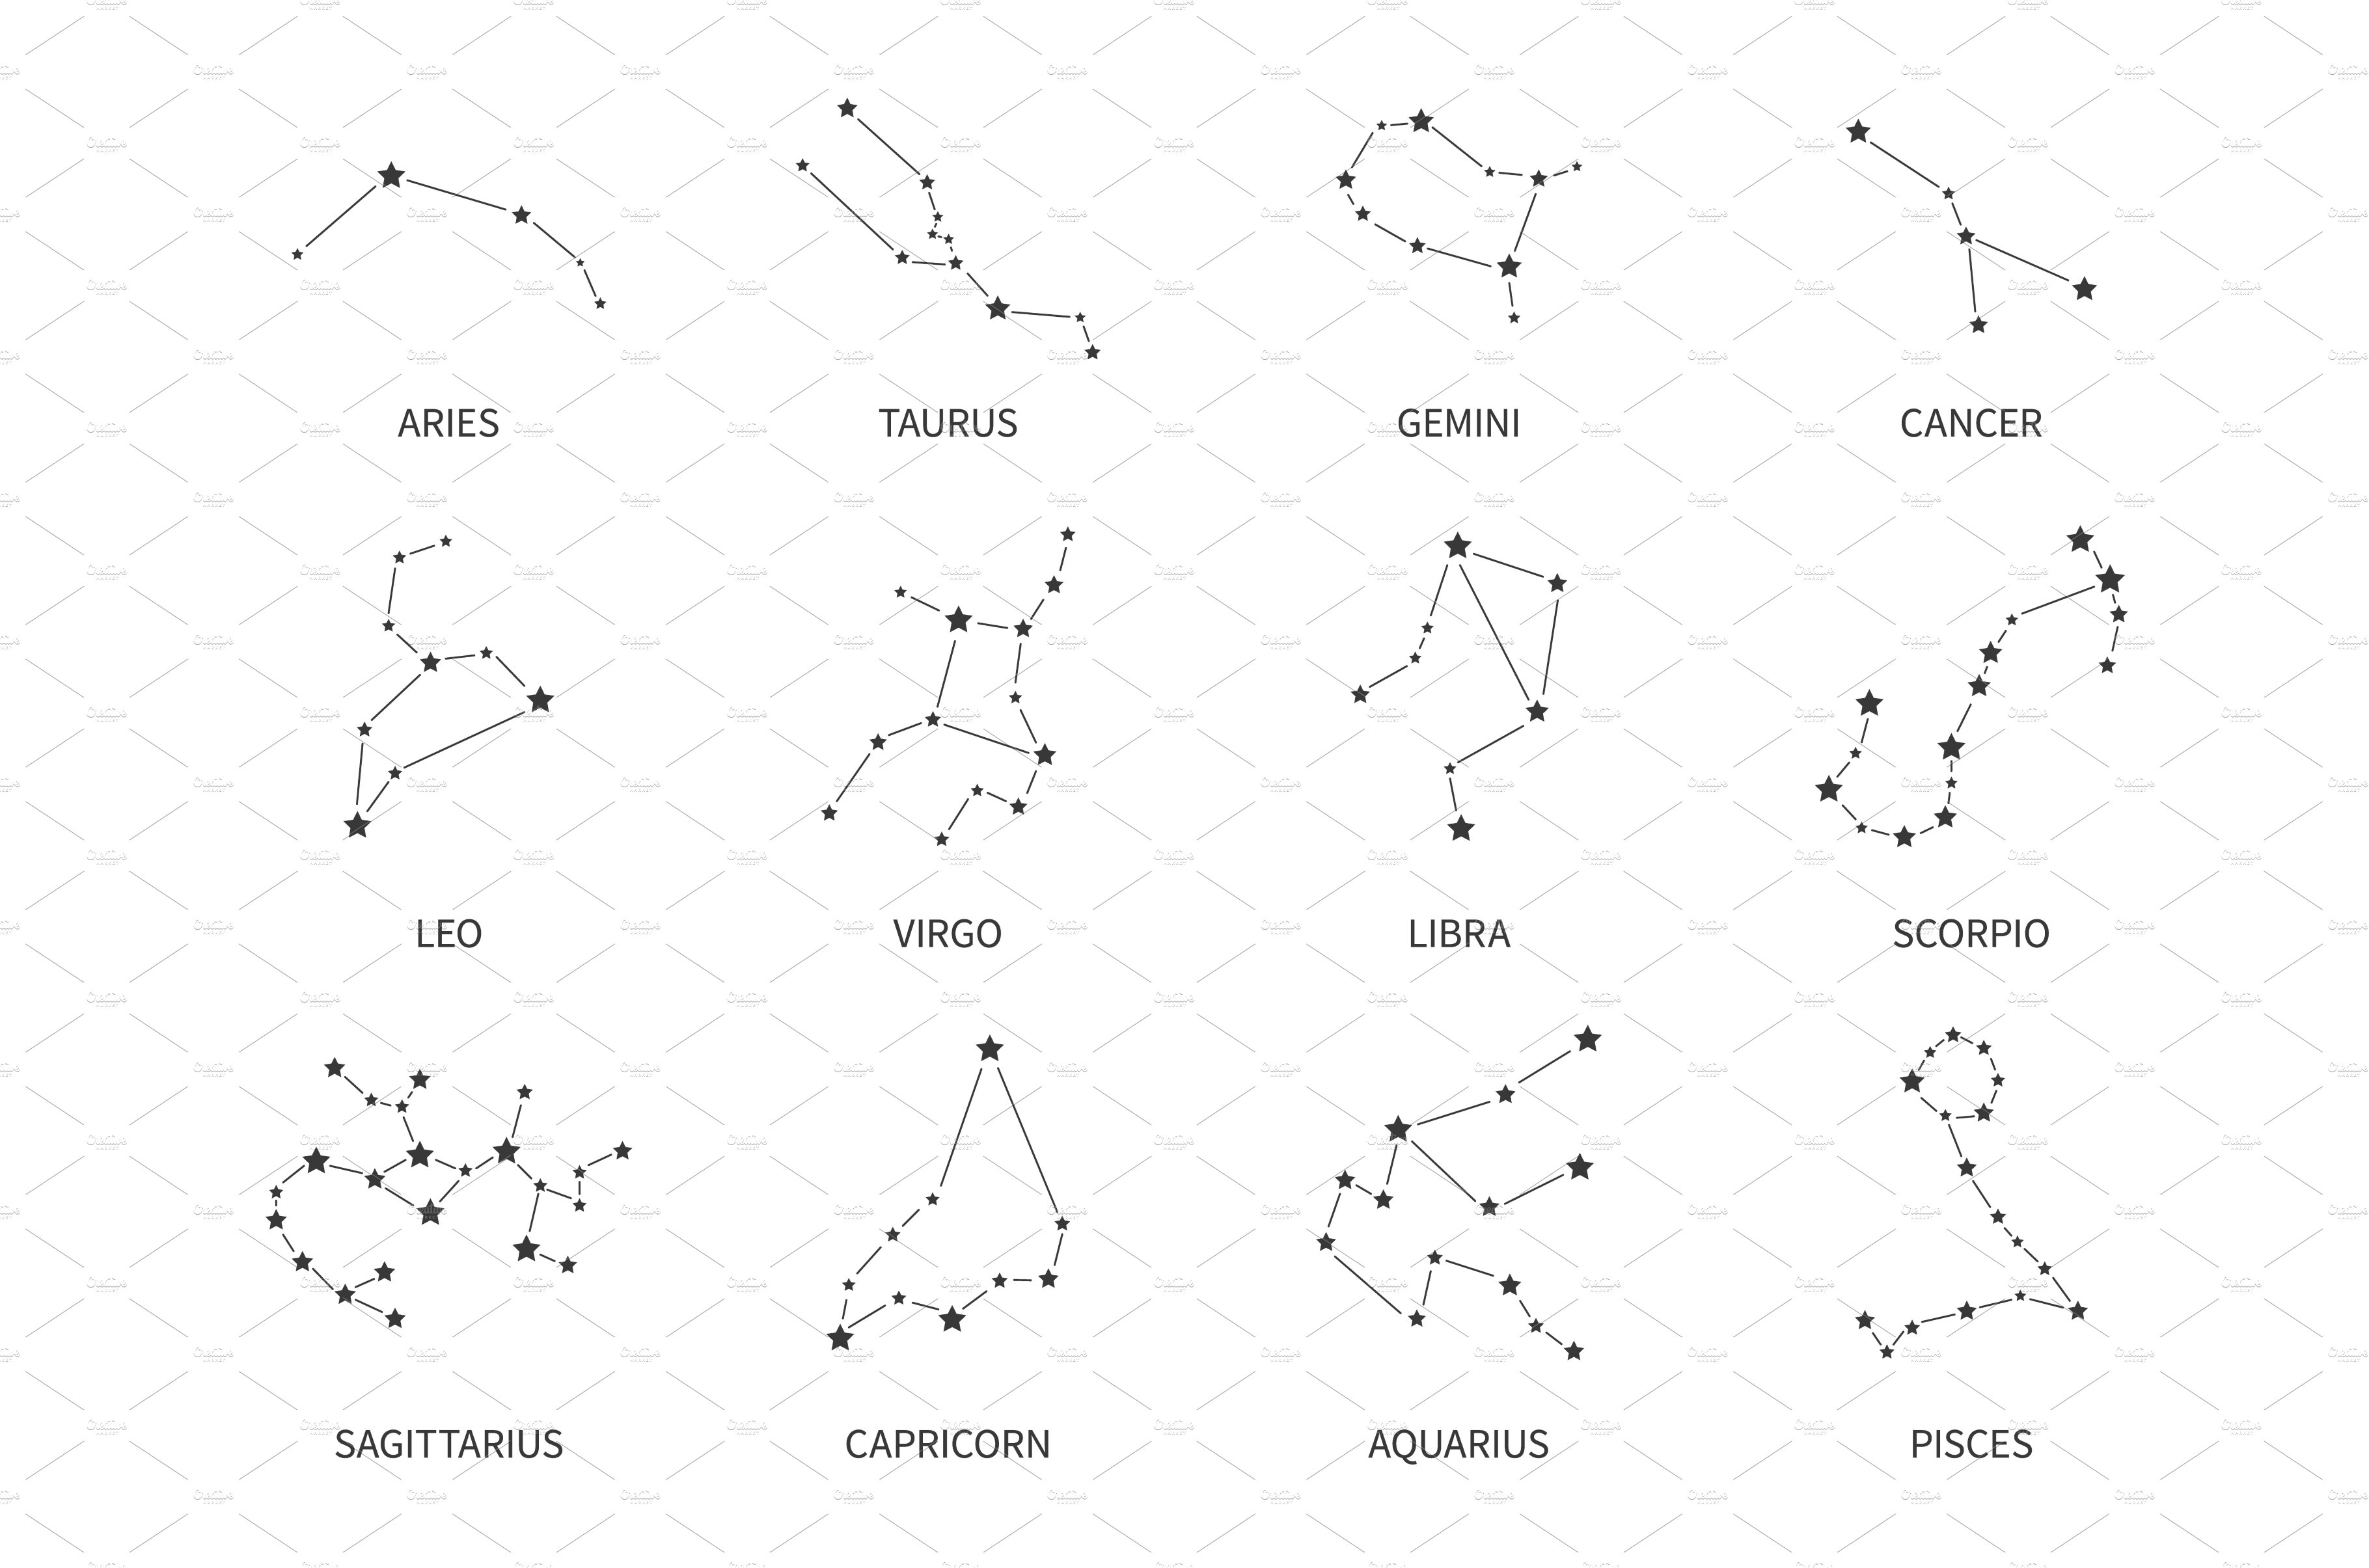 Zodiac signs constellations cover image.